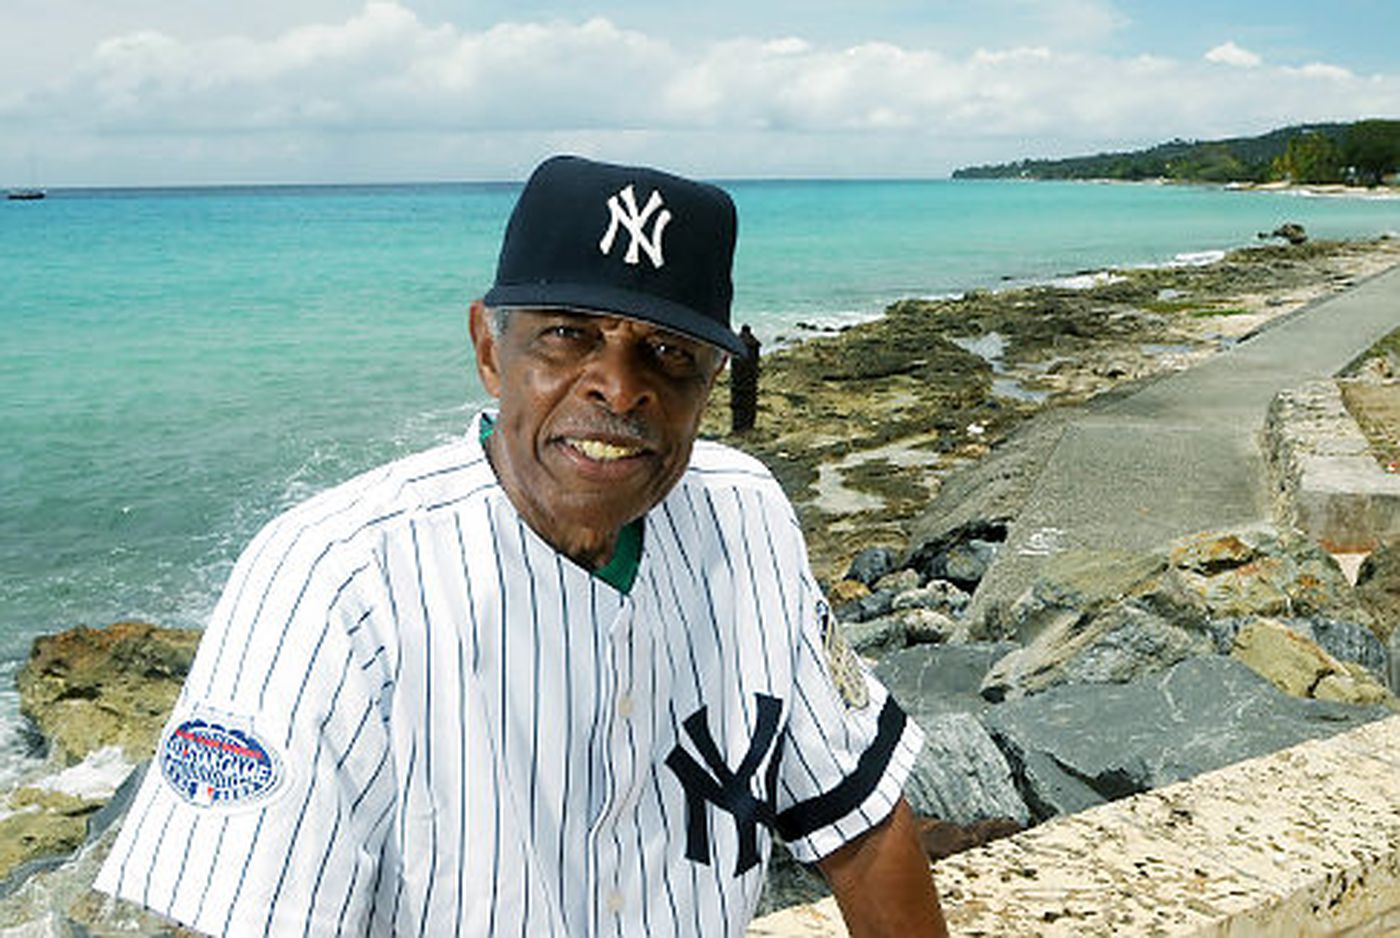 Horace Clarke, Standout Second Baseman For The New York Yankees, Dies At 81